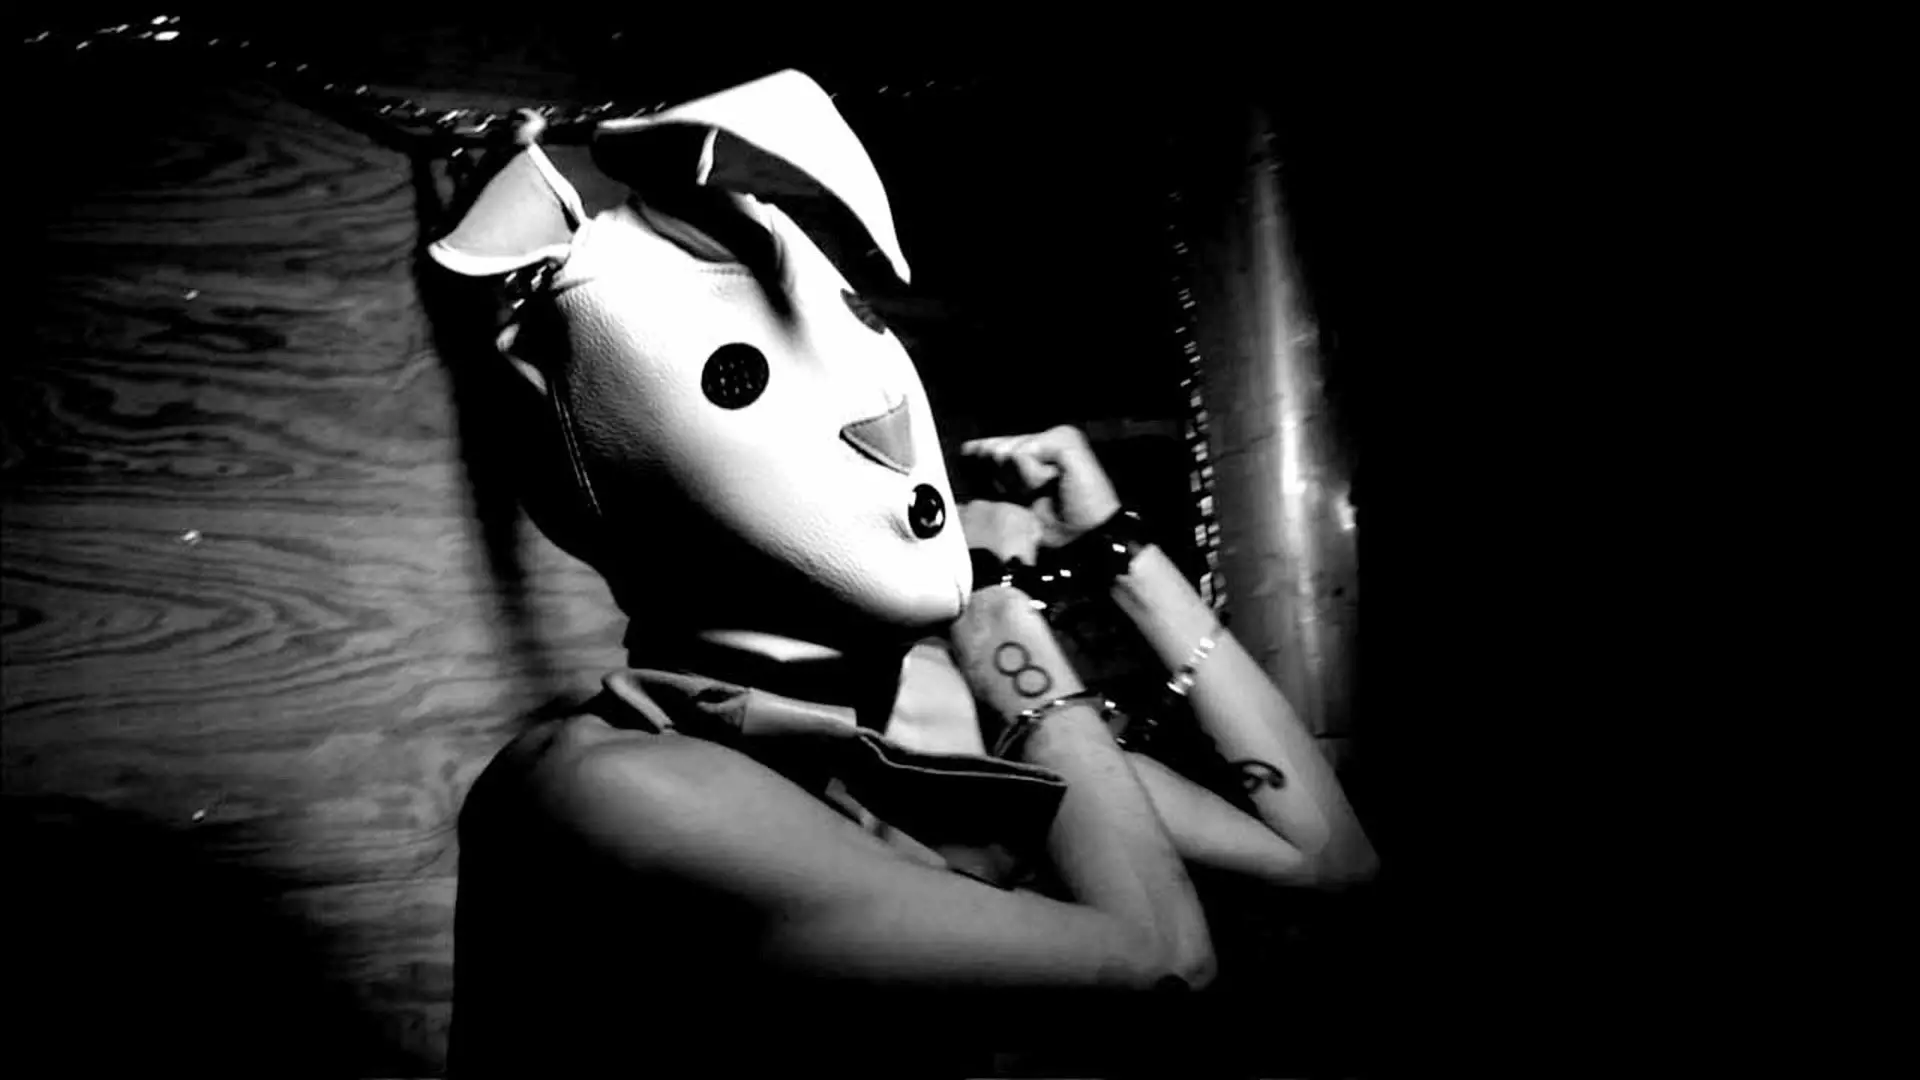 A woman with a rabbit mask and chained hands in the movie Bunny Game